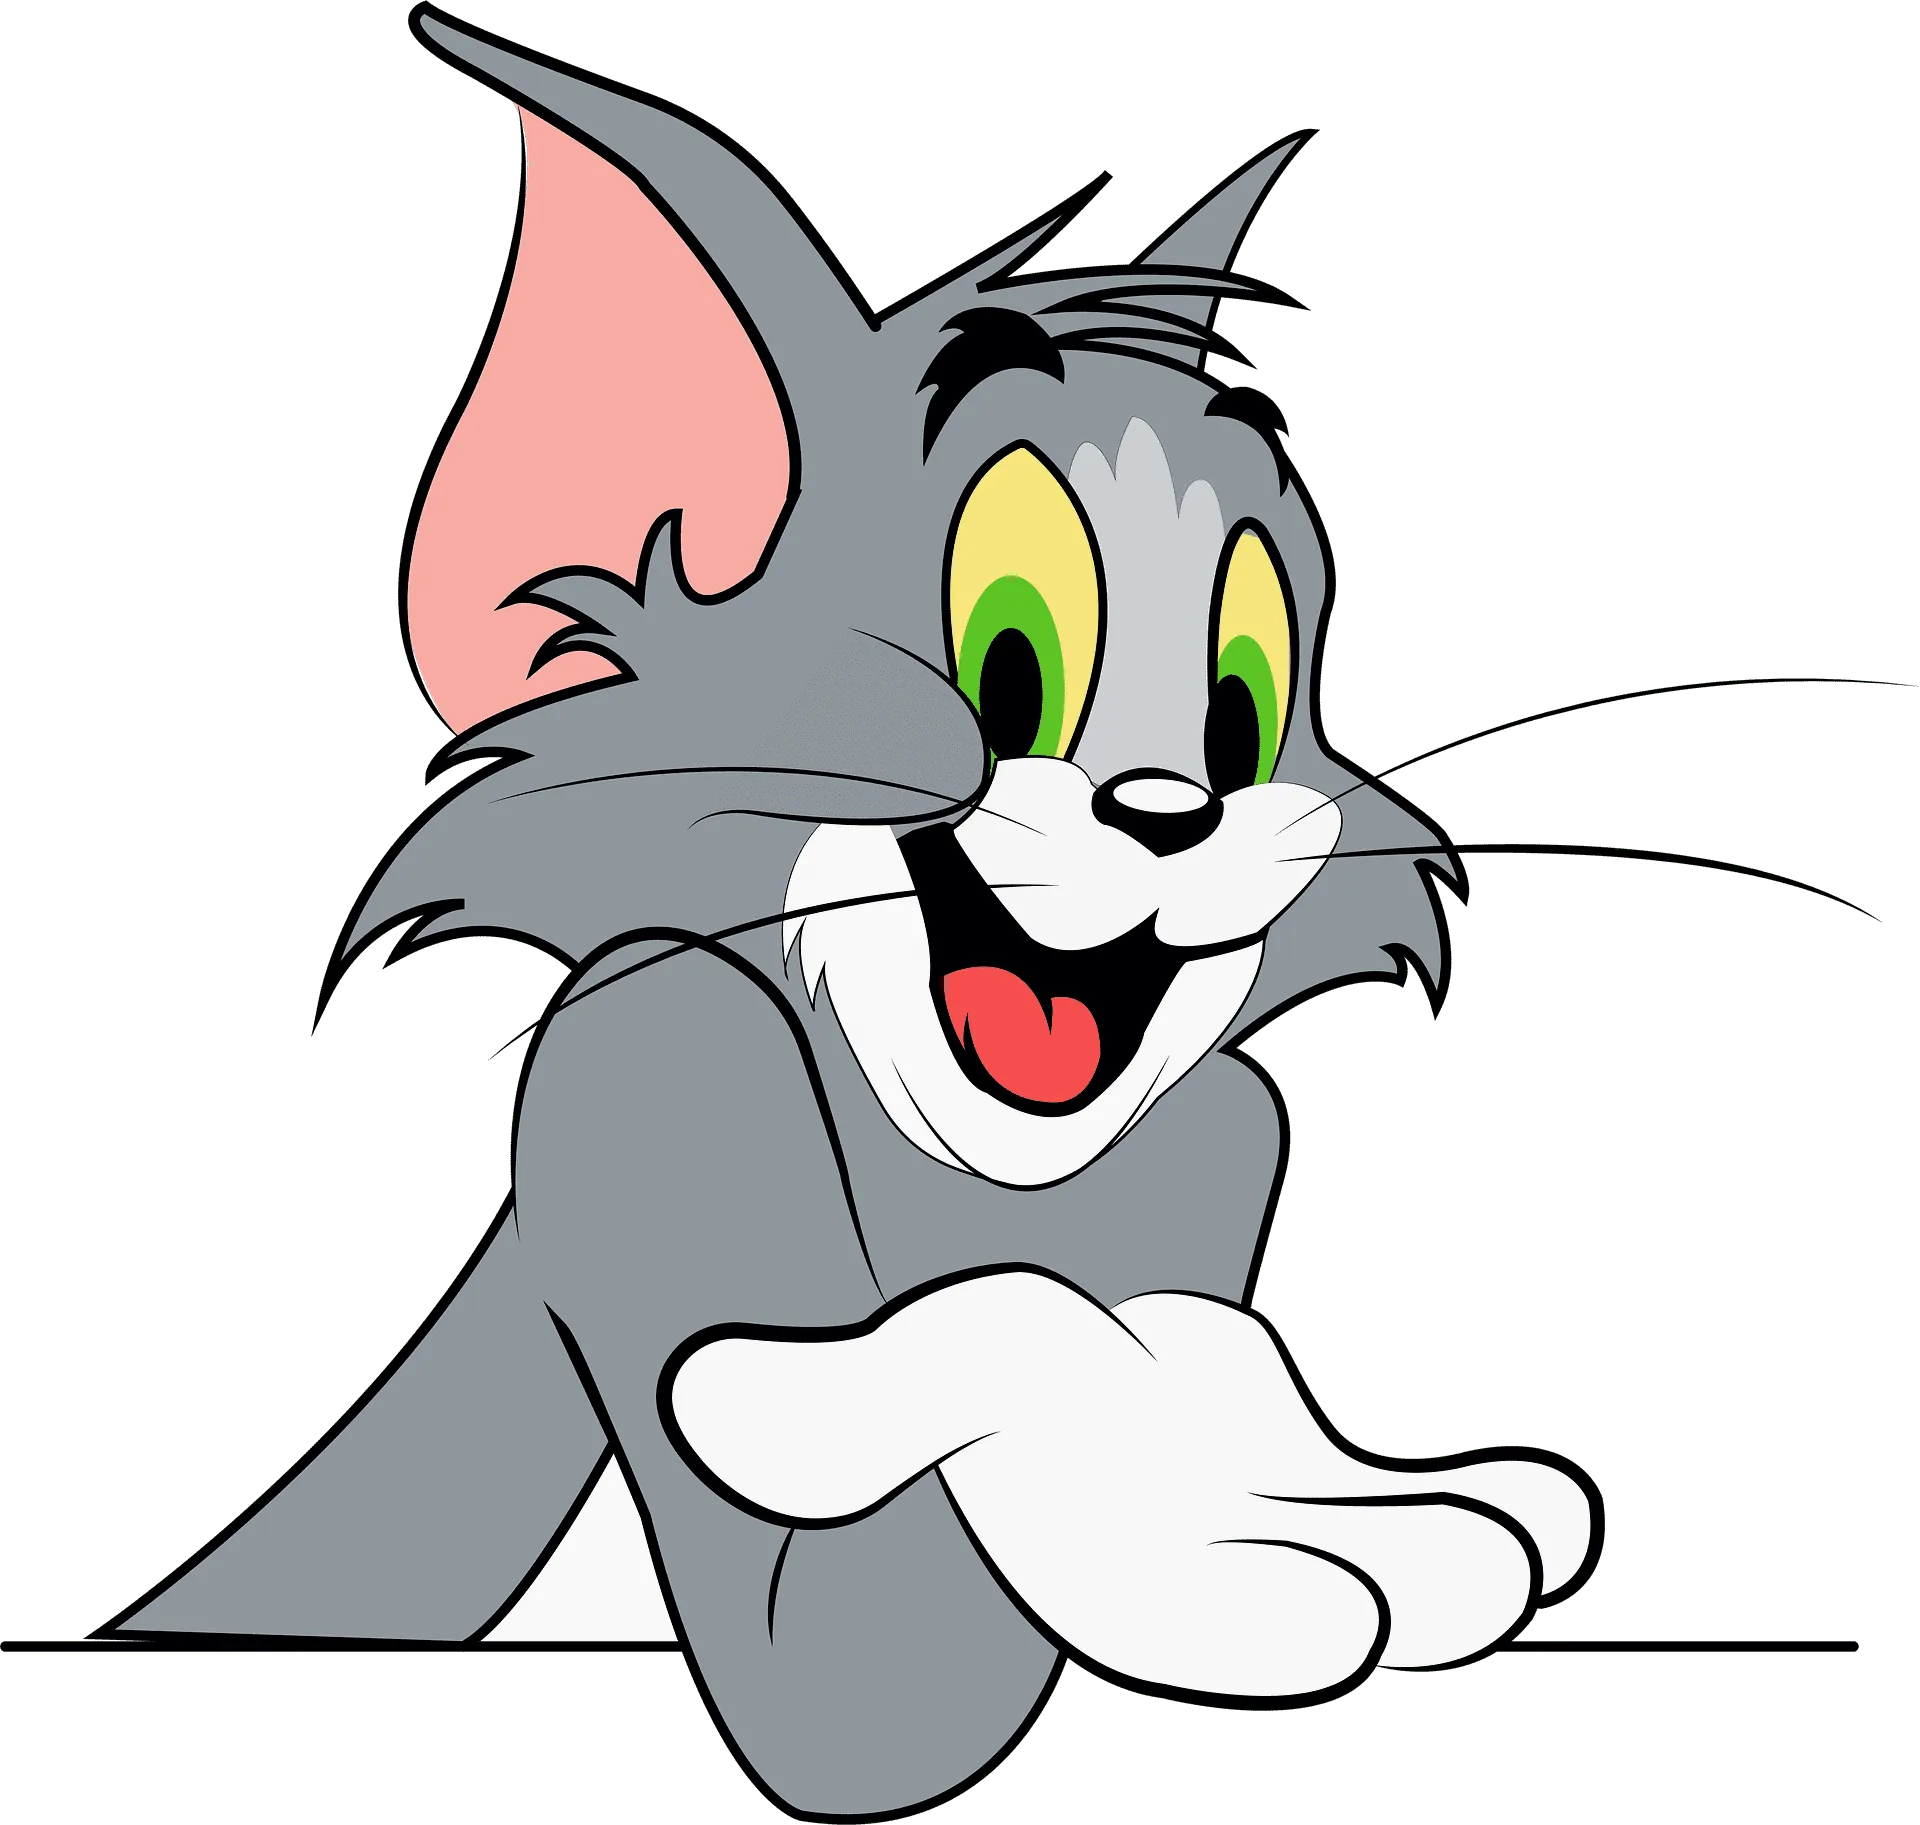 21 Fun Tom And Jerry Facts About Your Favorite Cartoon Characters | Kidadl